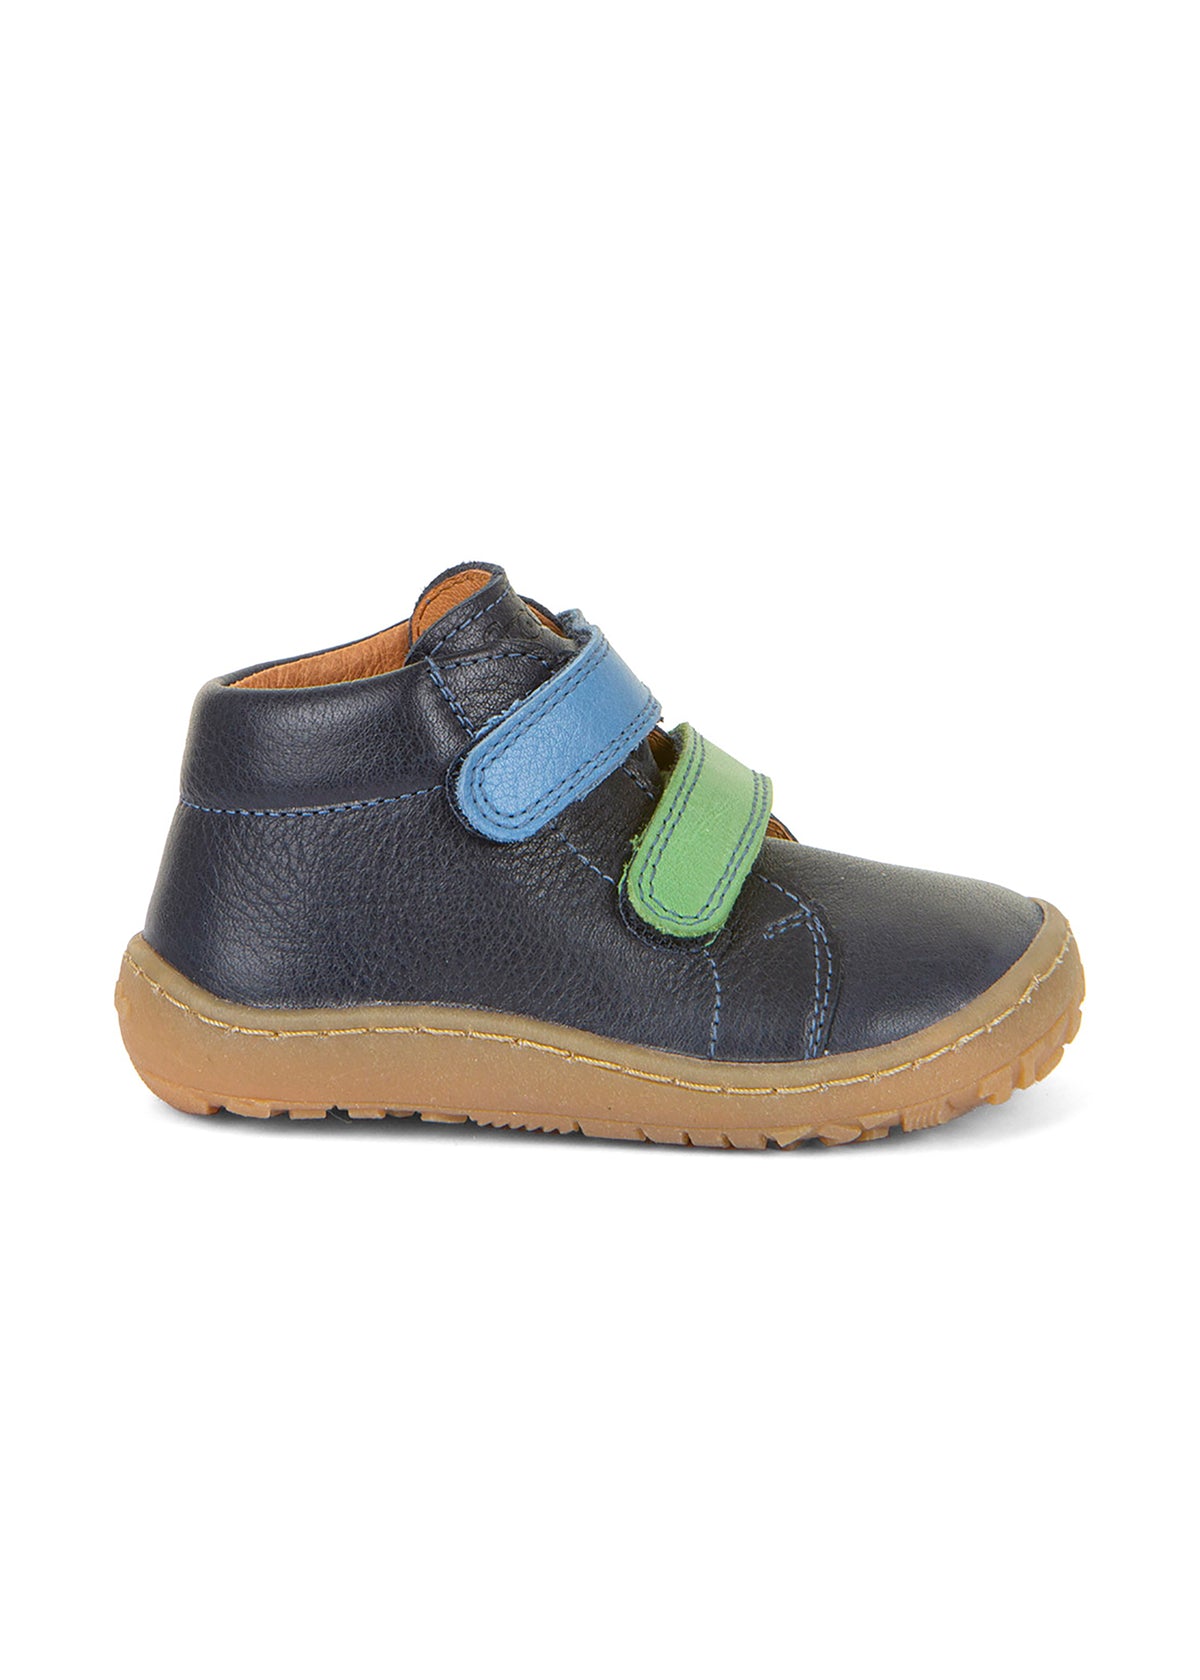 Children's barefoot shoes - dark blue leather, blue-green Velcro straps, Barefoot First Step